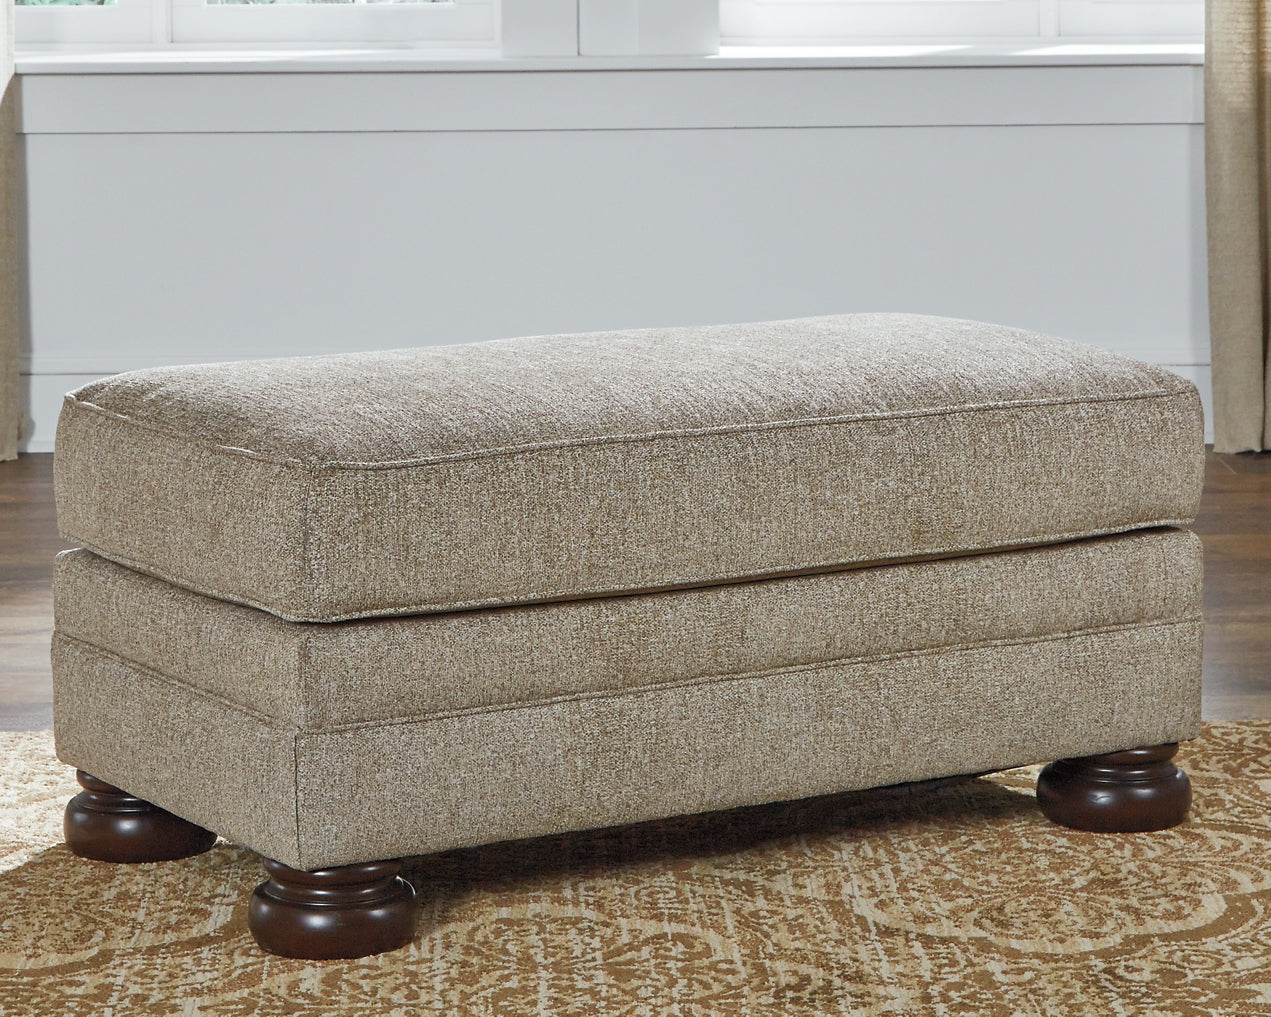 Kananwood Sofa, Loveseat, Chair and Ottoman Rent Wise Rent To Own Jacksonville, Florida